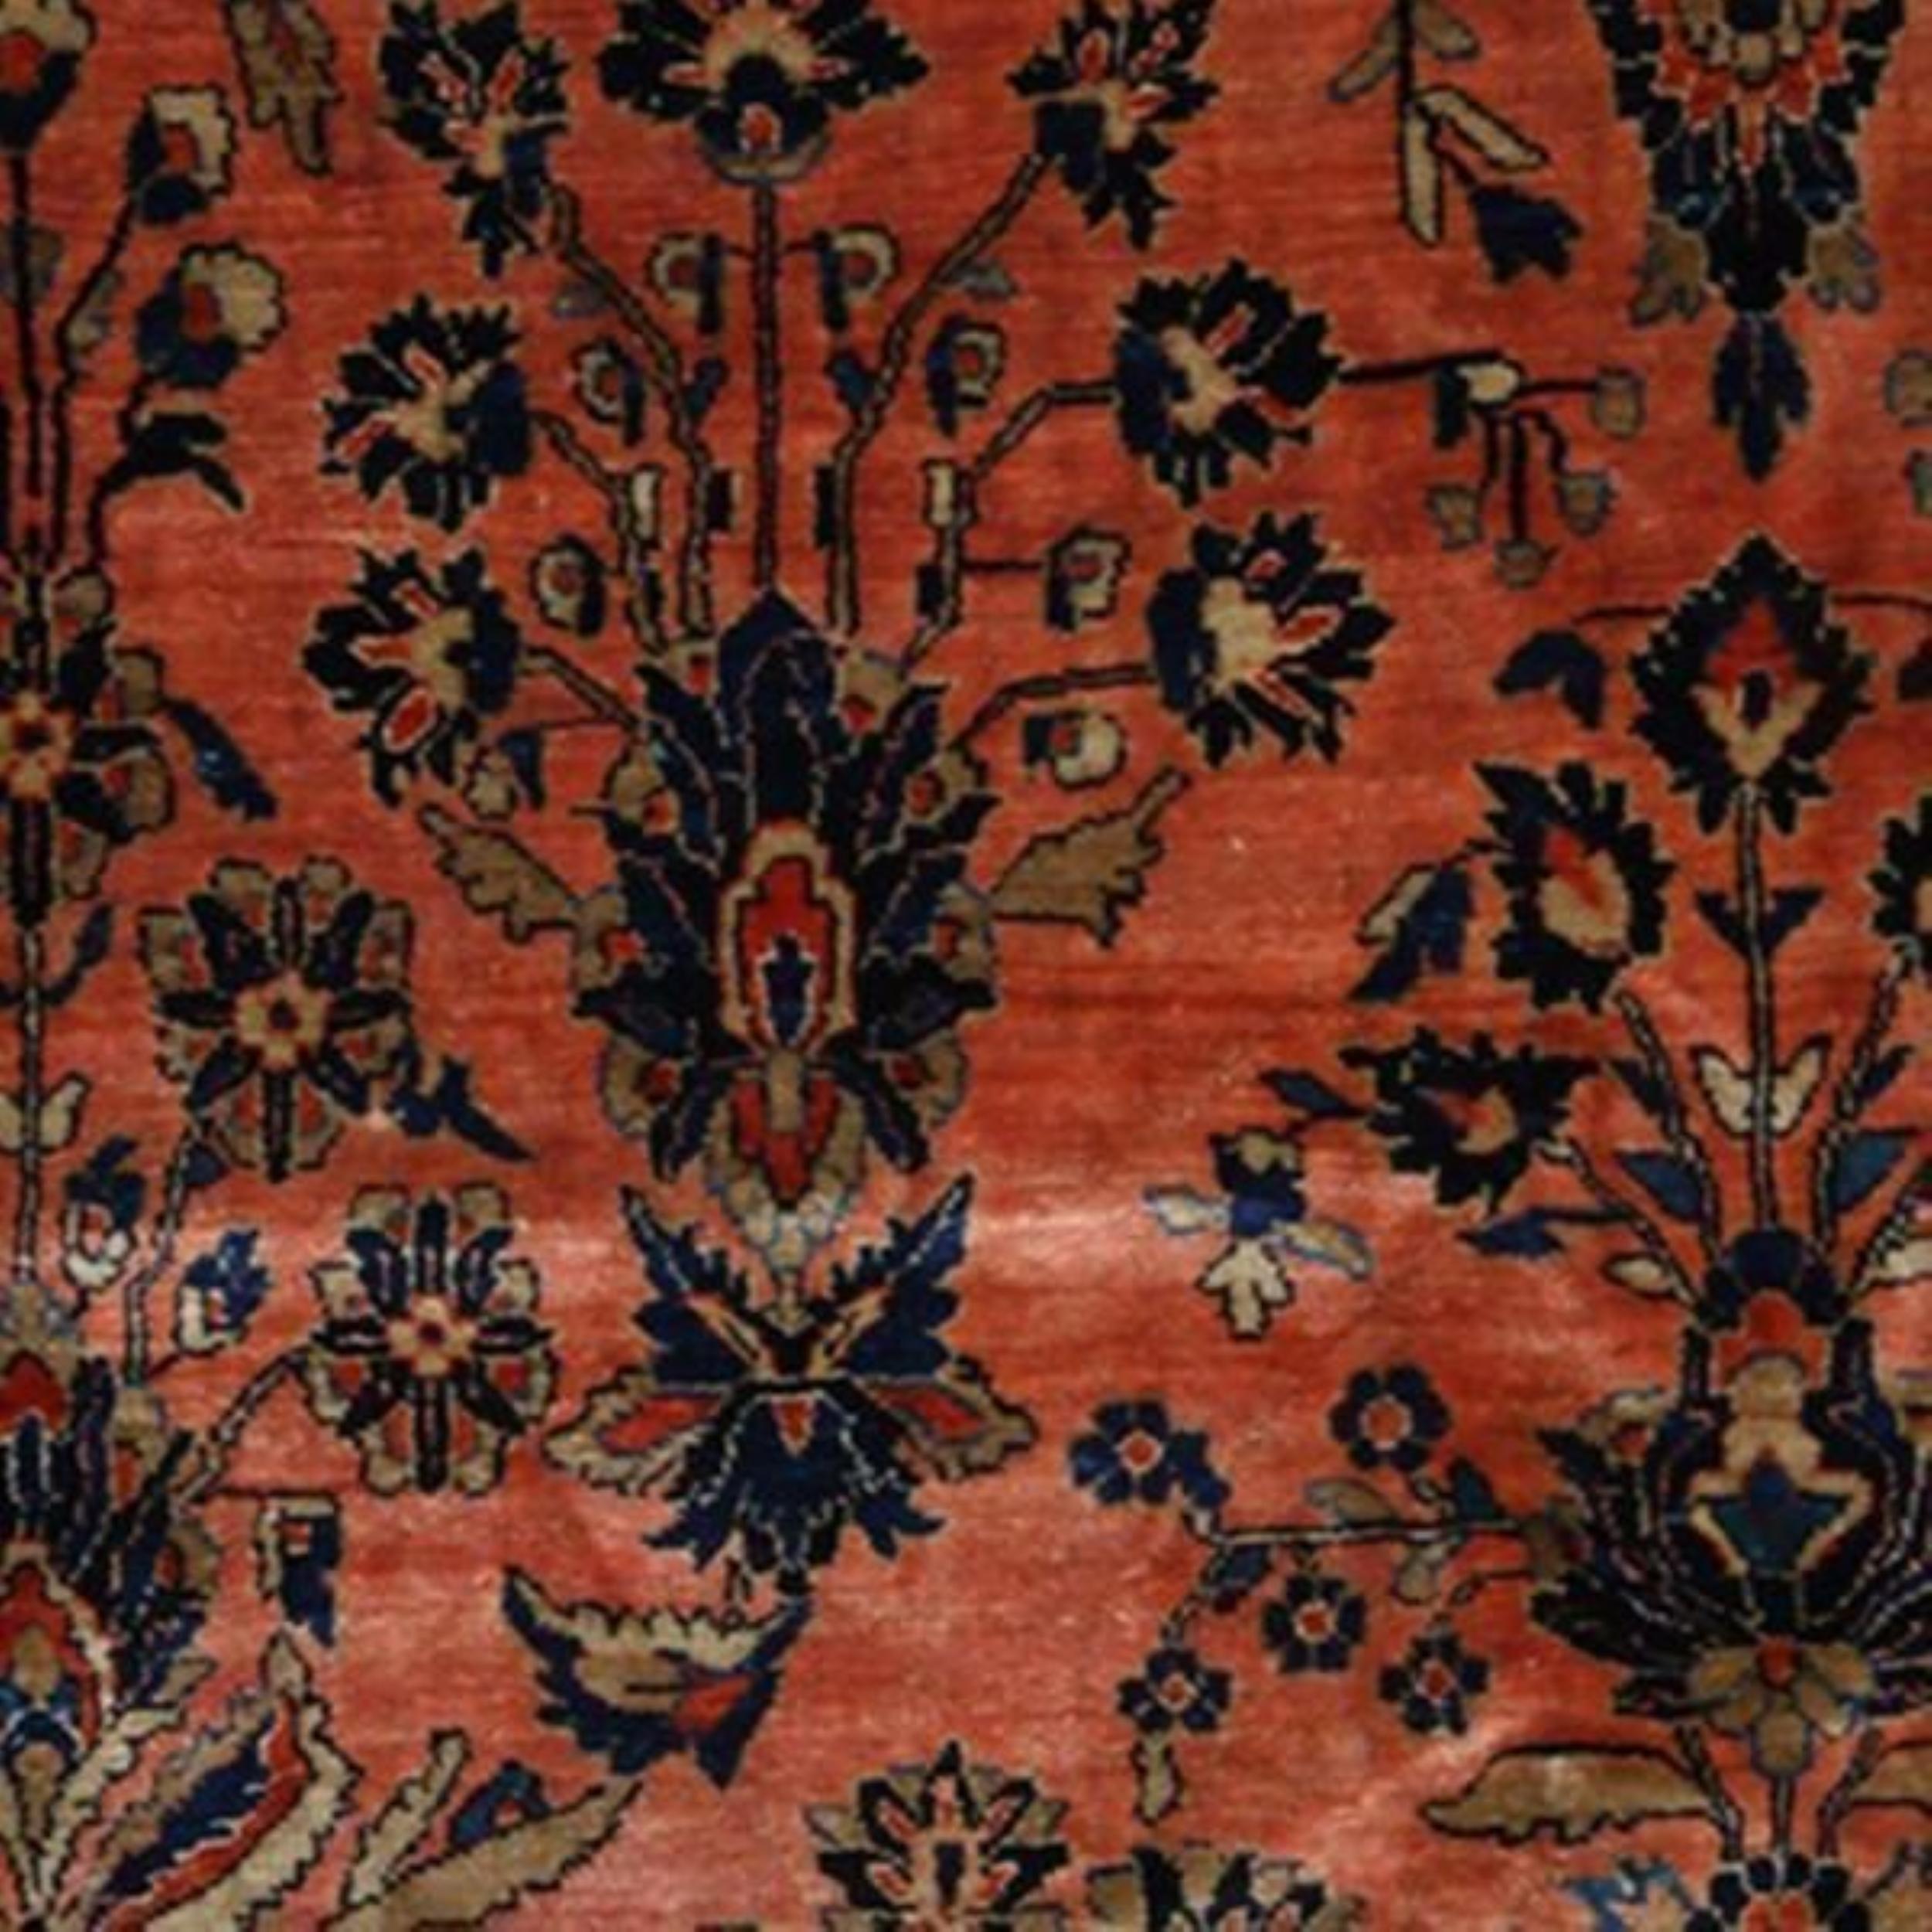 Mid-20th Century Hand-Knotted Antique Sarouk Persian Rug in Orange and Black Floral Pattern For Sale